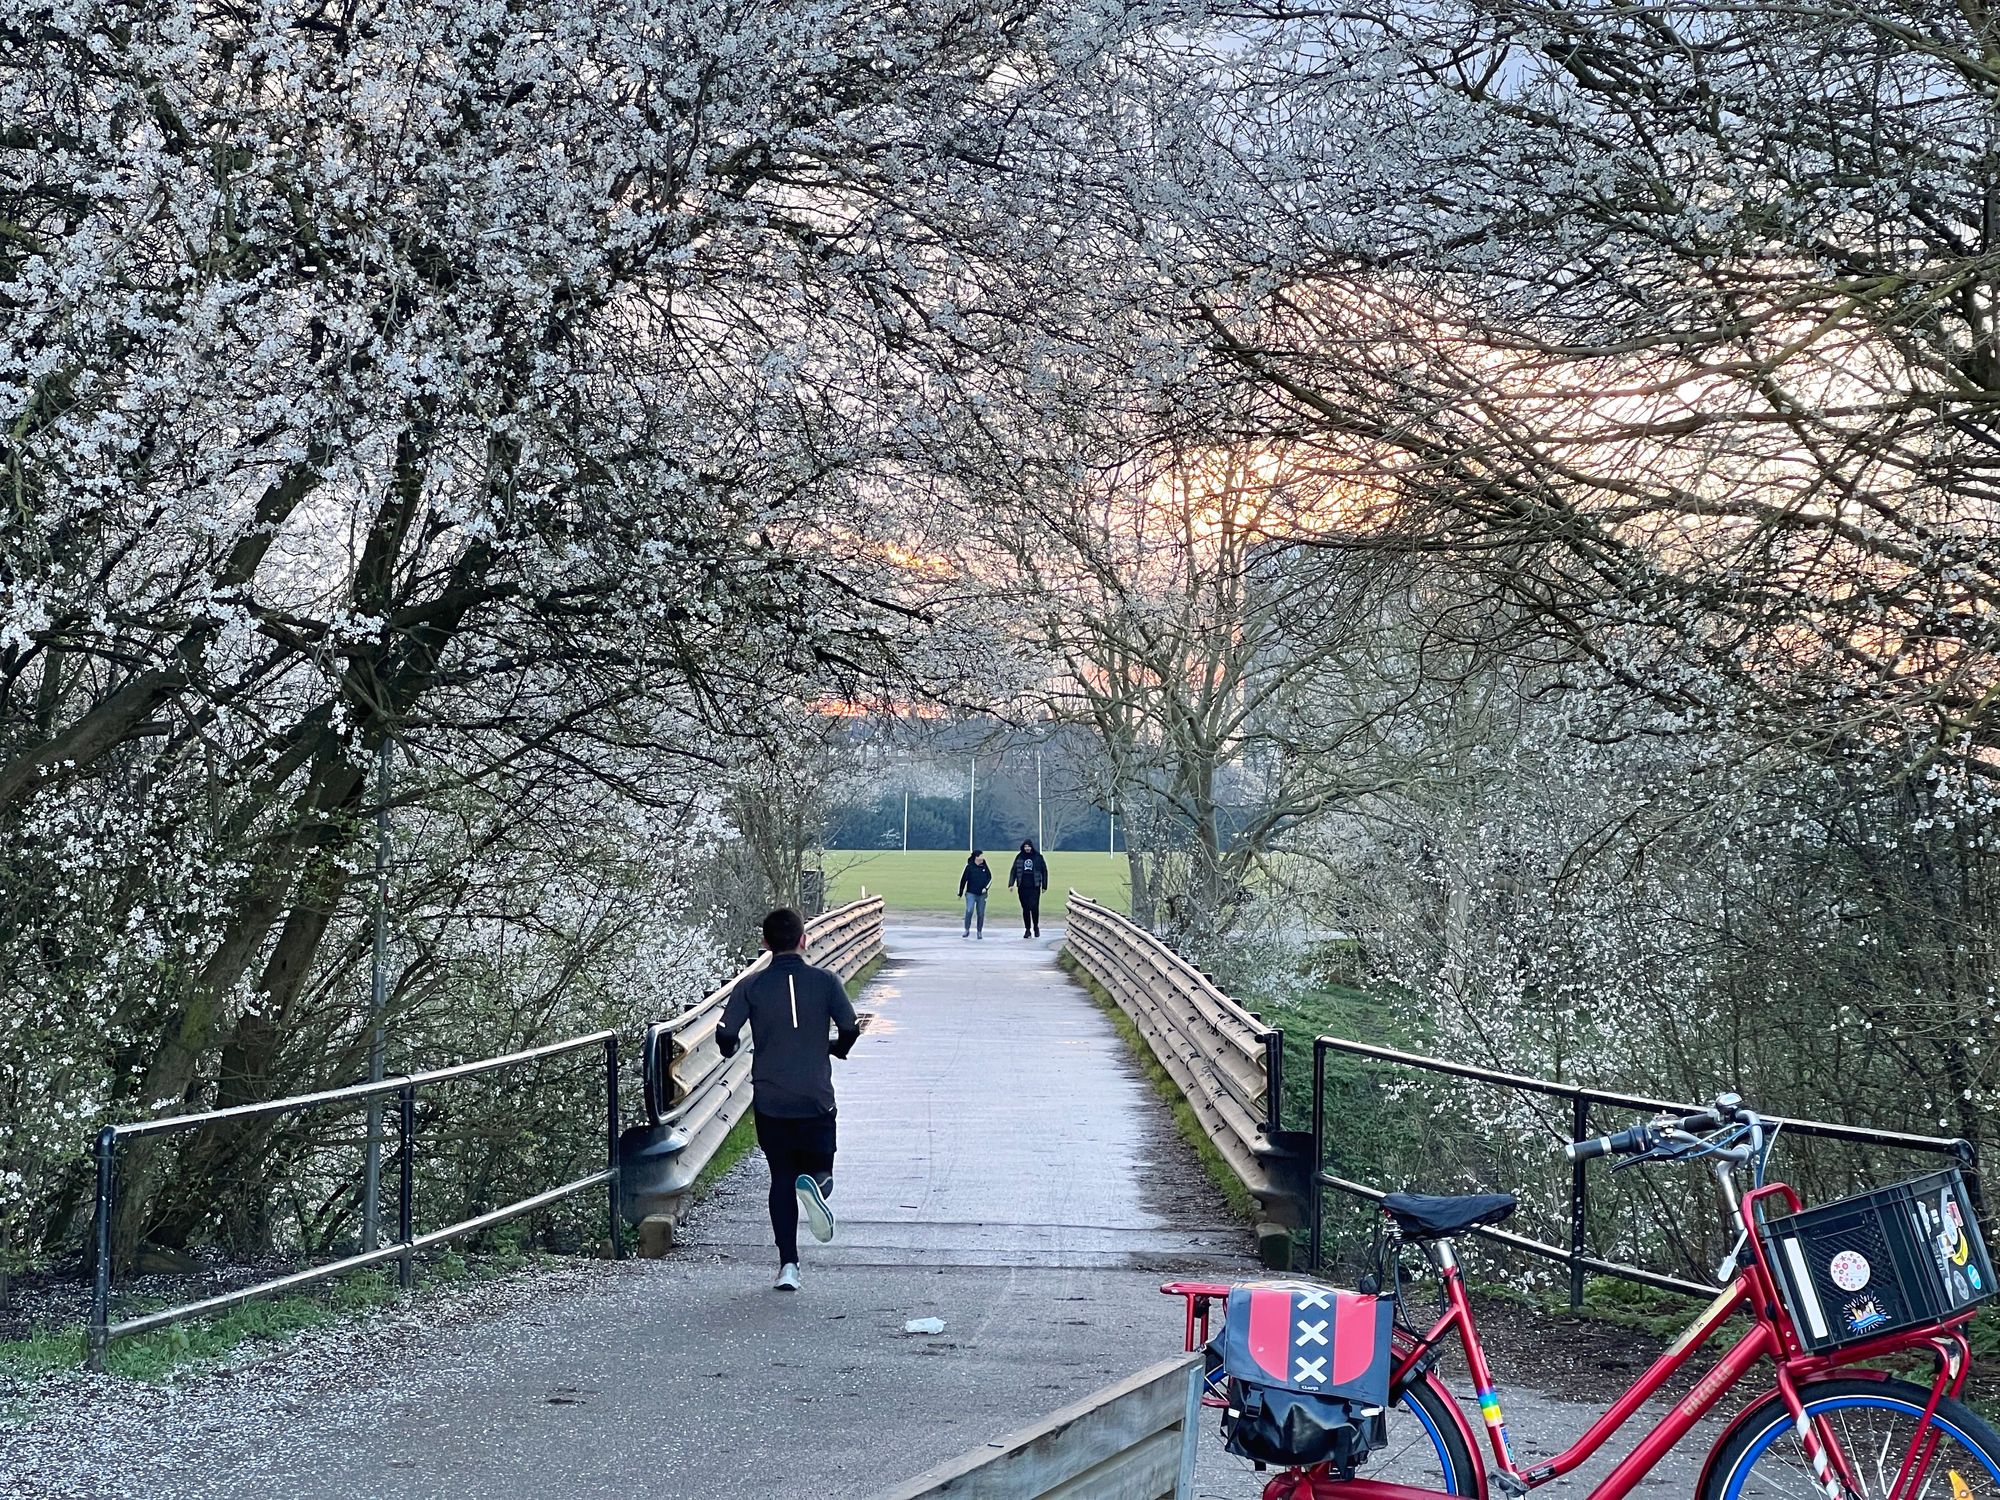 A red bicycle on a kickstand in front of a bridge with the sun setting behind boughs laden with white blossom. A runner heads away from camera on the bridge while two walkers come the other way.